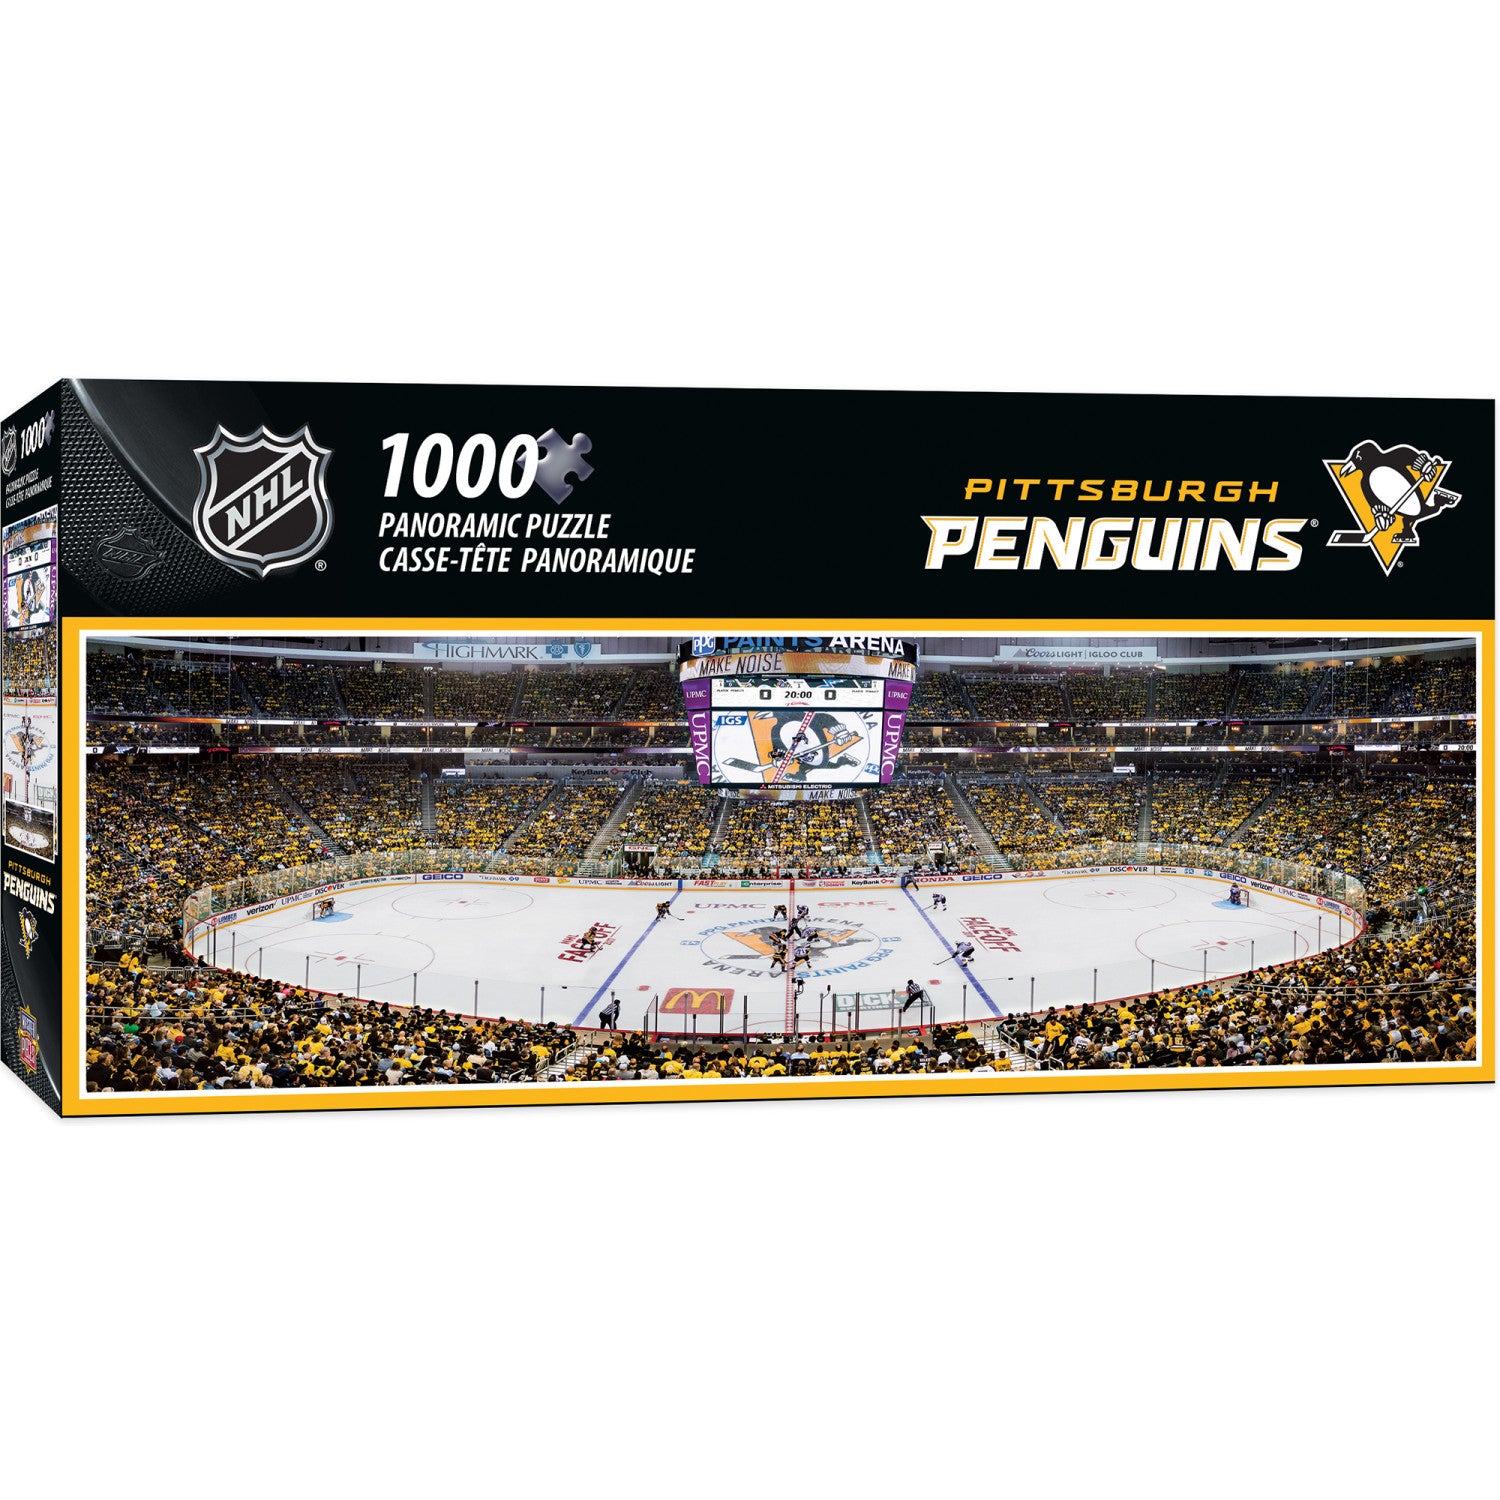 Pittsburgh Penguins - 1000 Piece Panoramic Puzzle